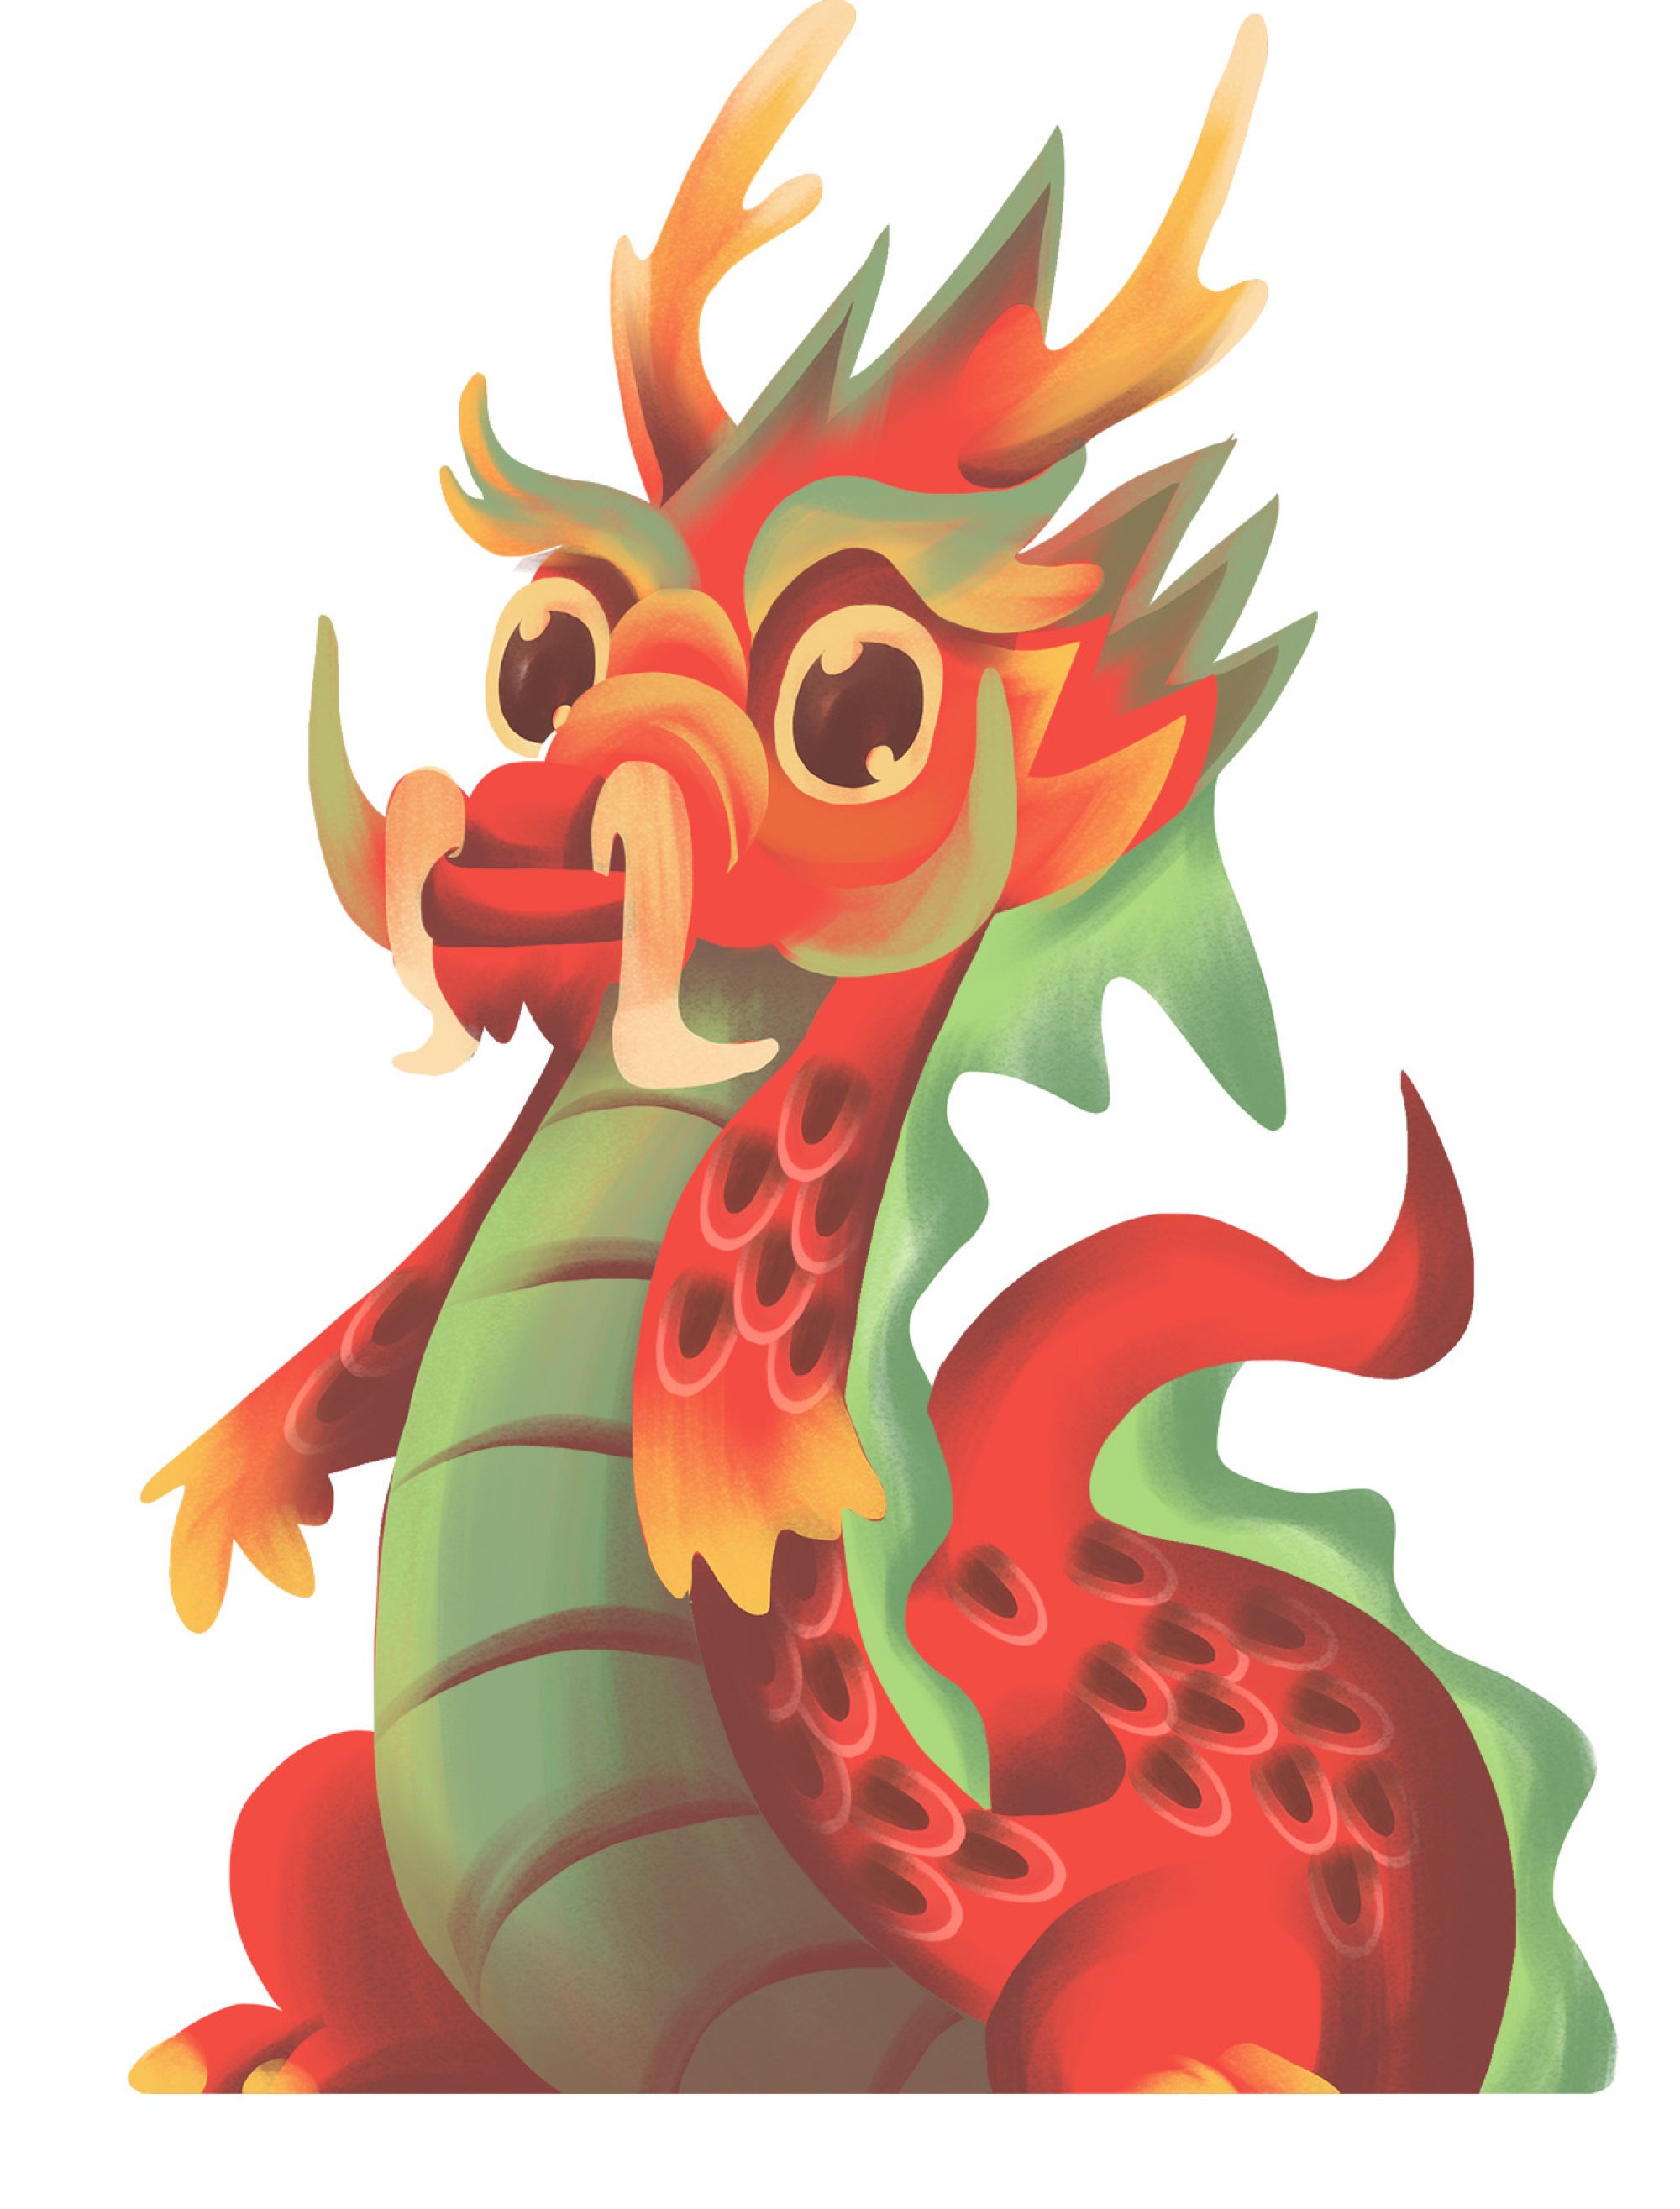 Dragon Year decor hotter than ever before